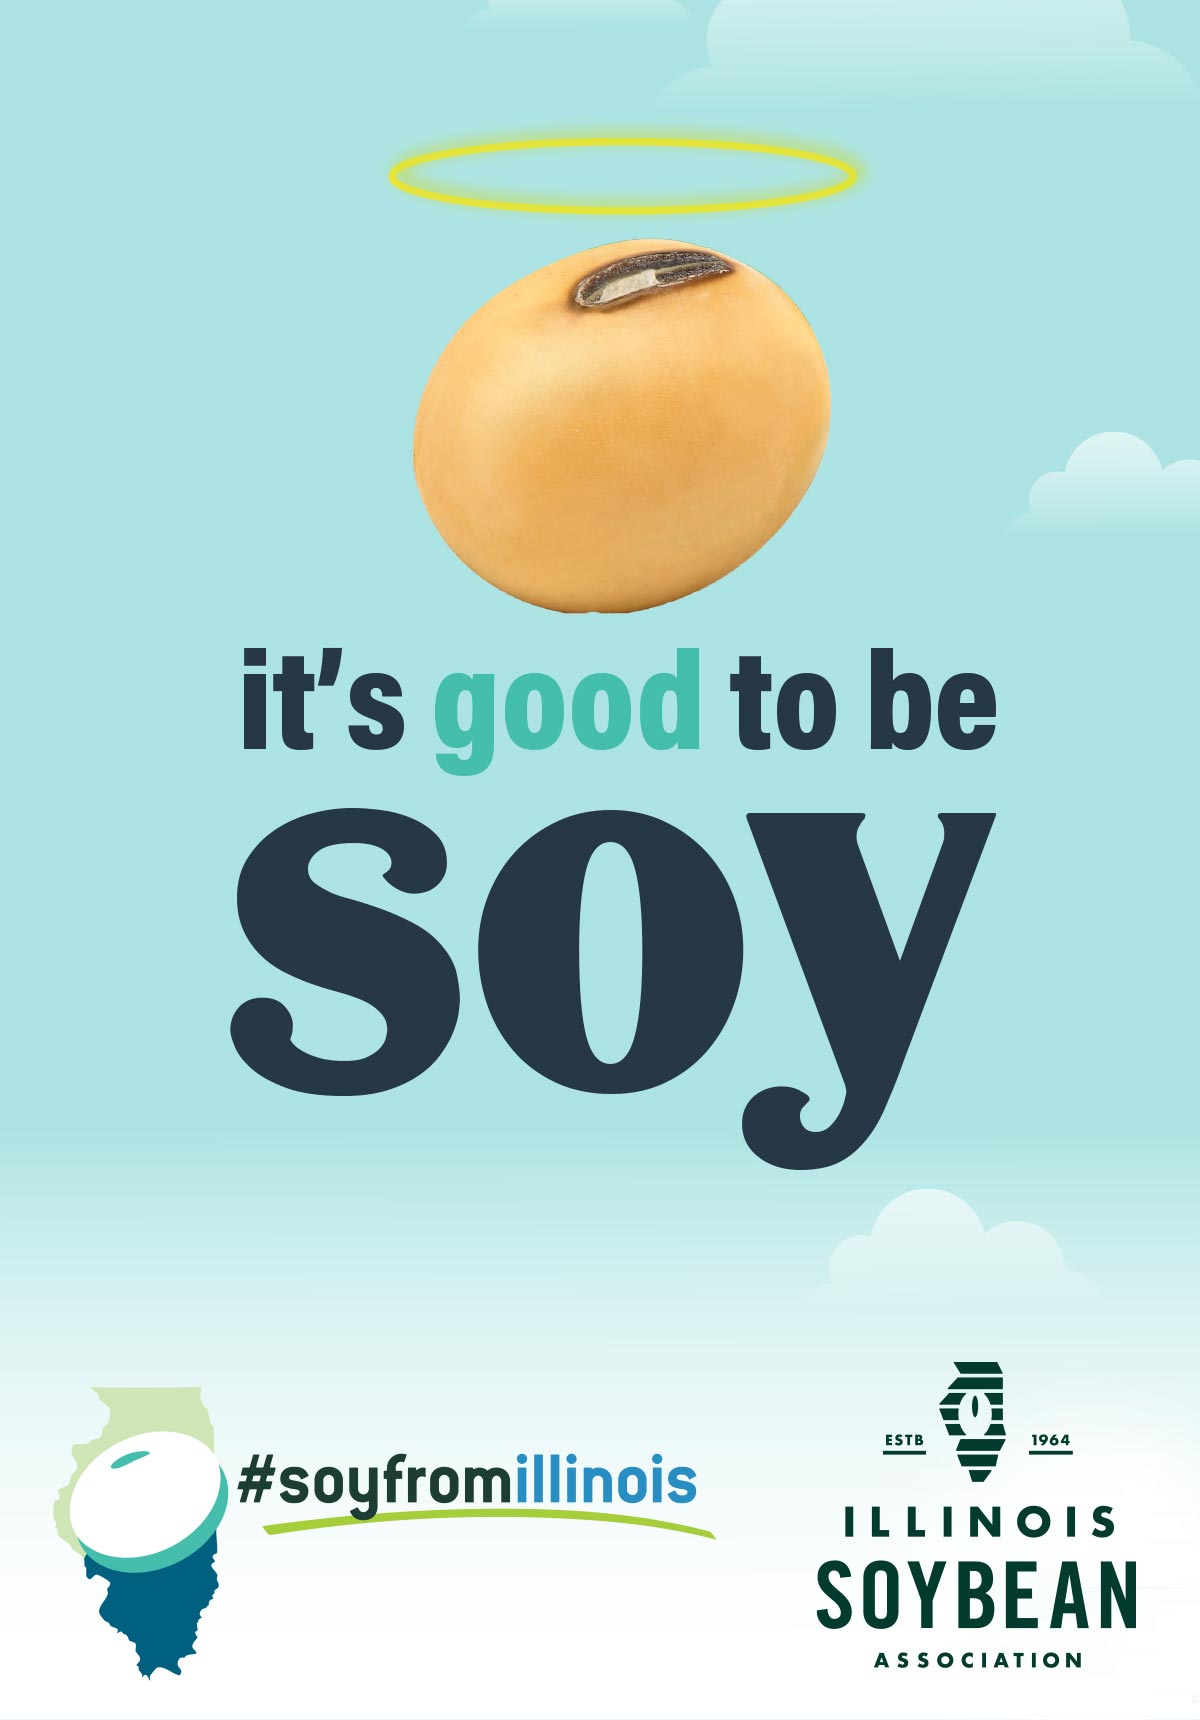 It's good to be soy poster for Illinois soybean association